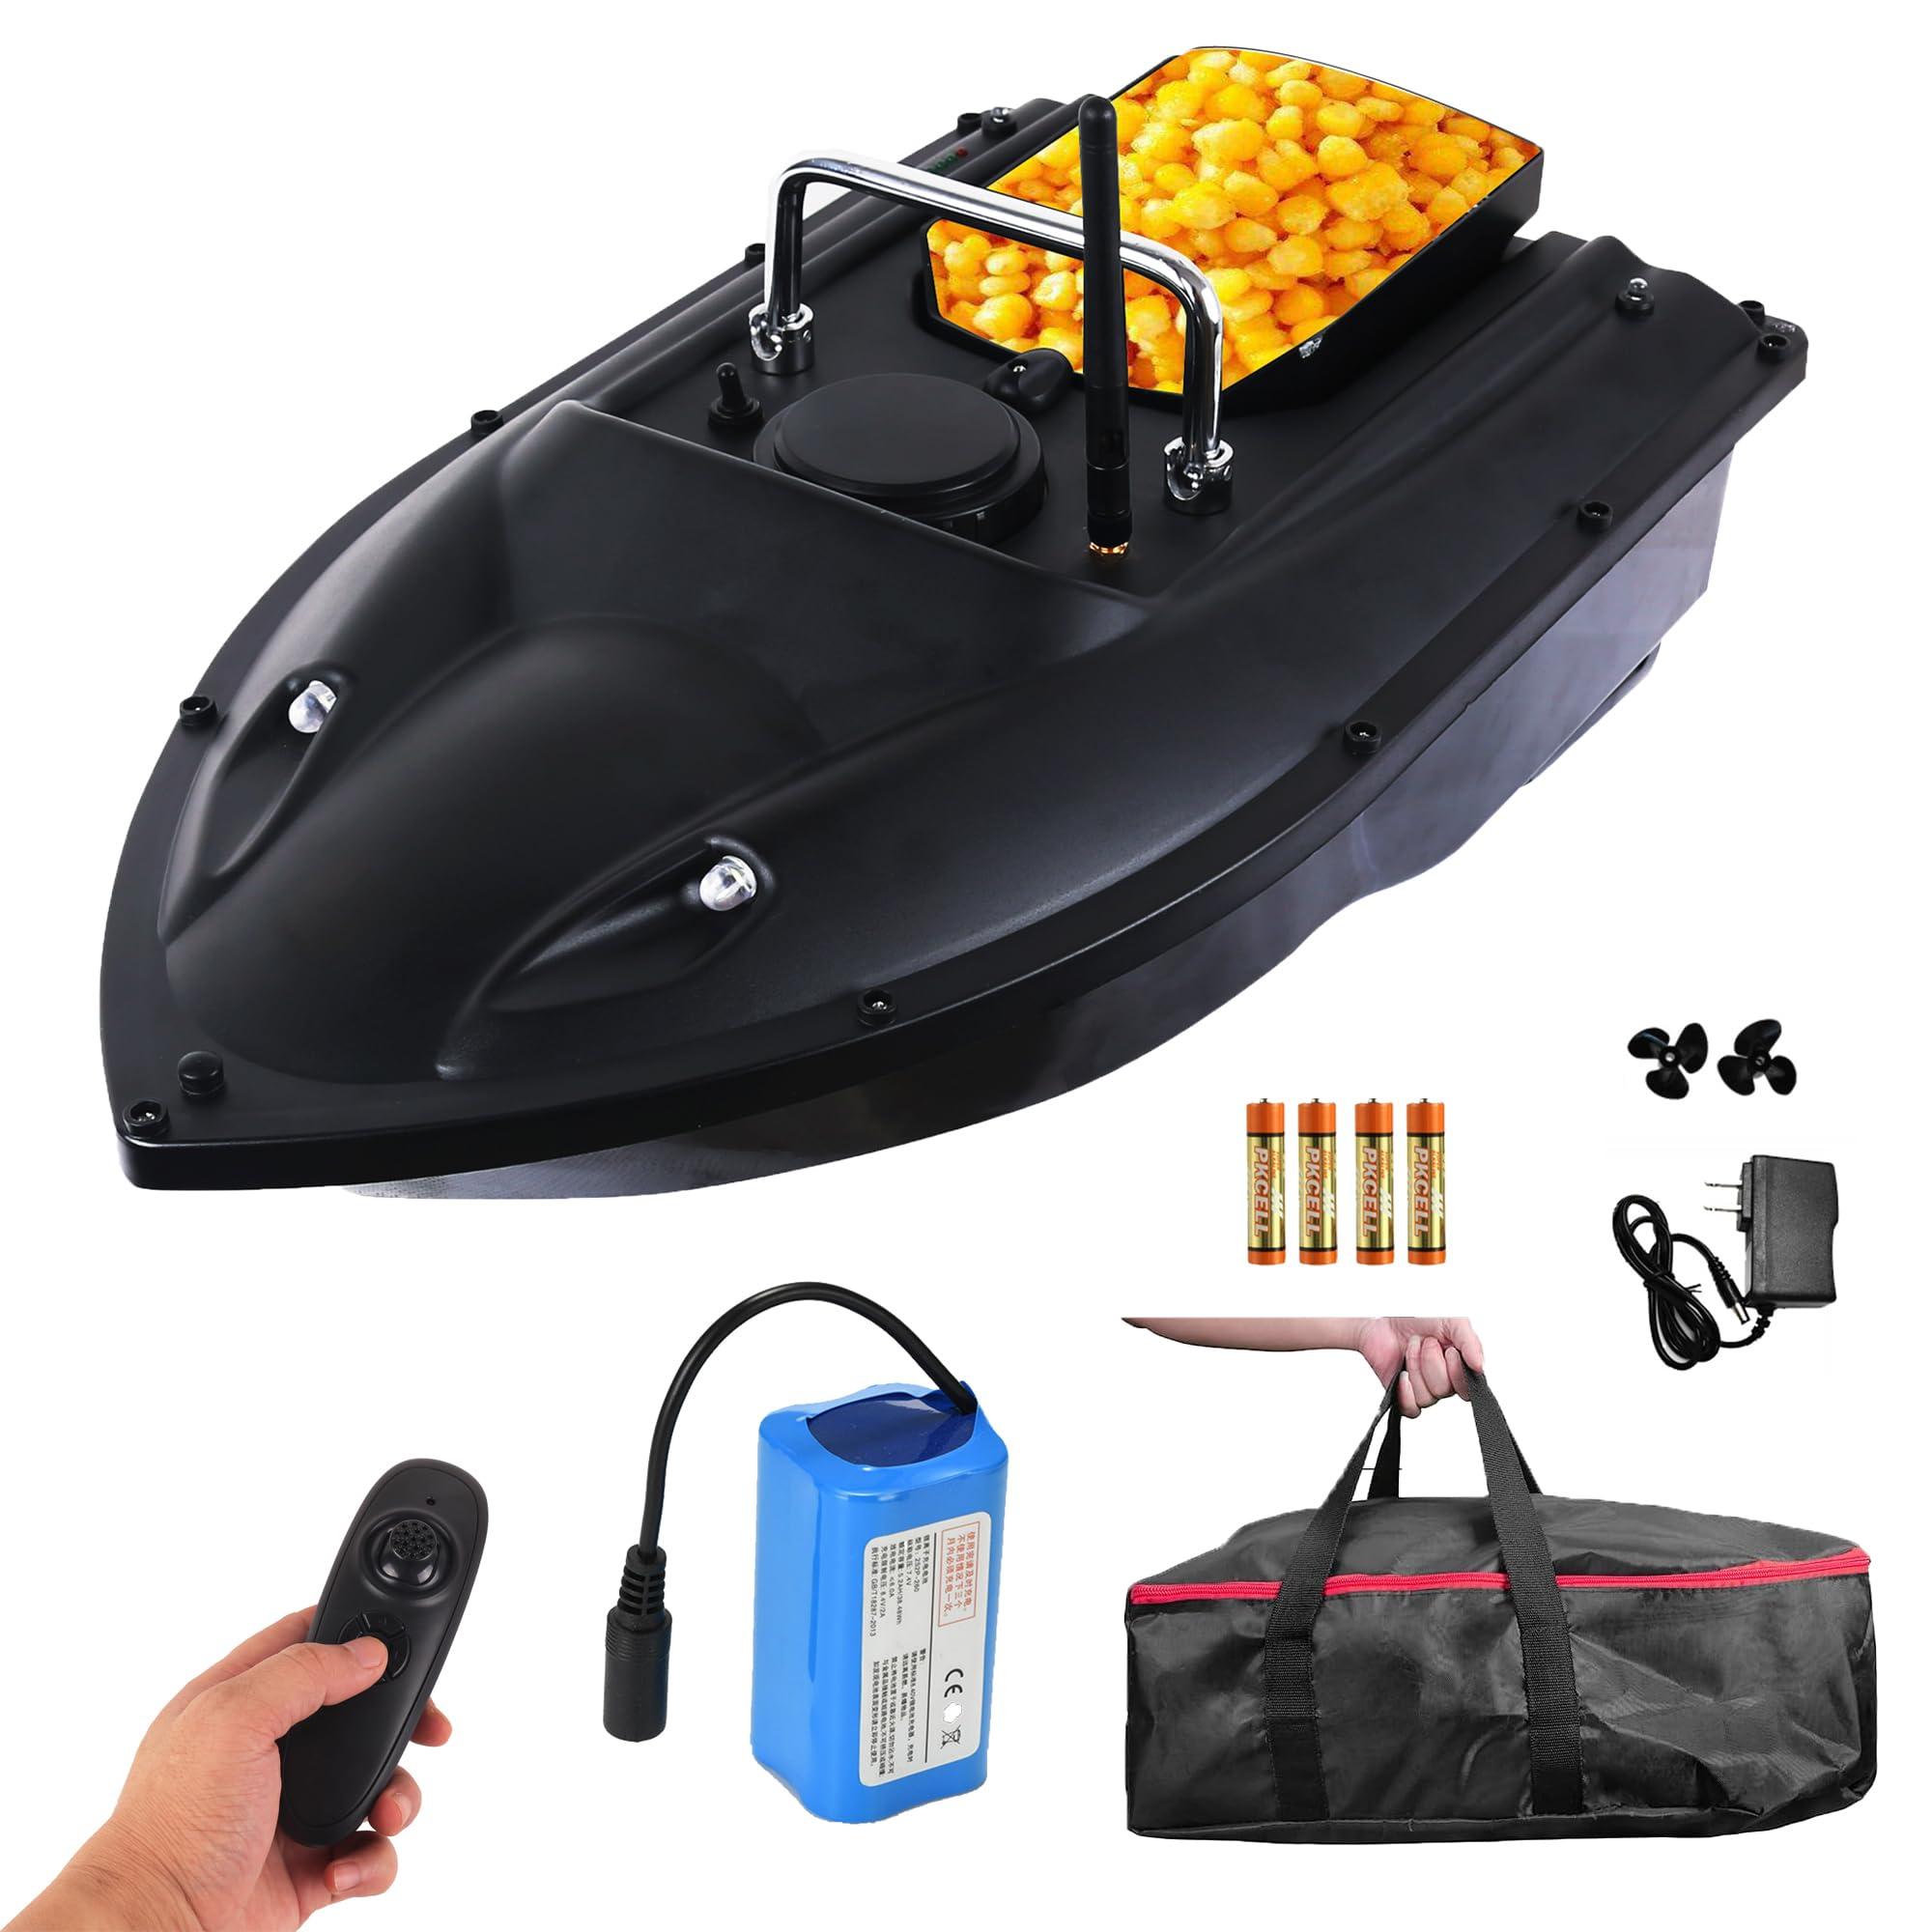 Long Distance Fishing Remote Control Boat: Safety Precautions for Using a Remote Control Boat for Fishing